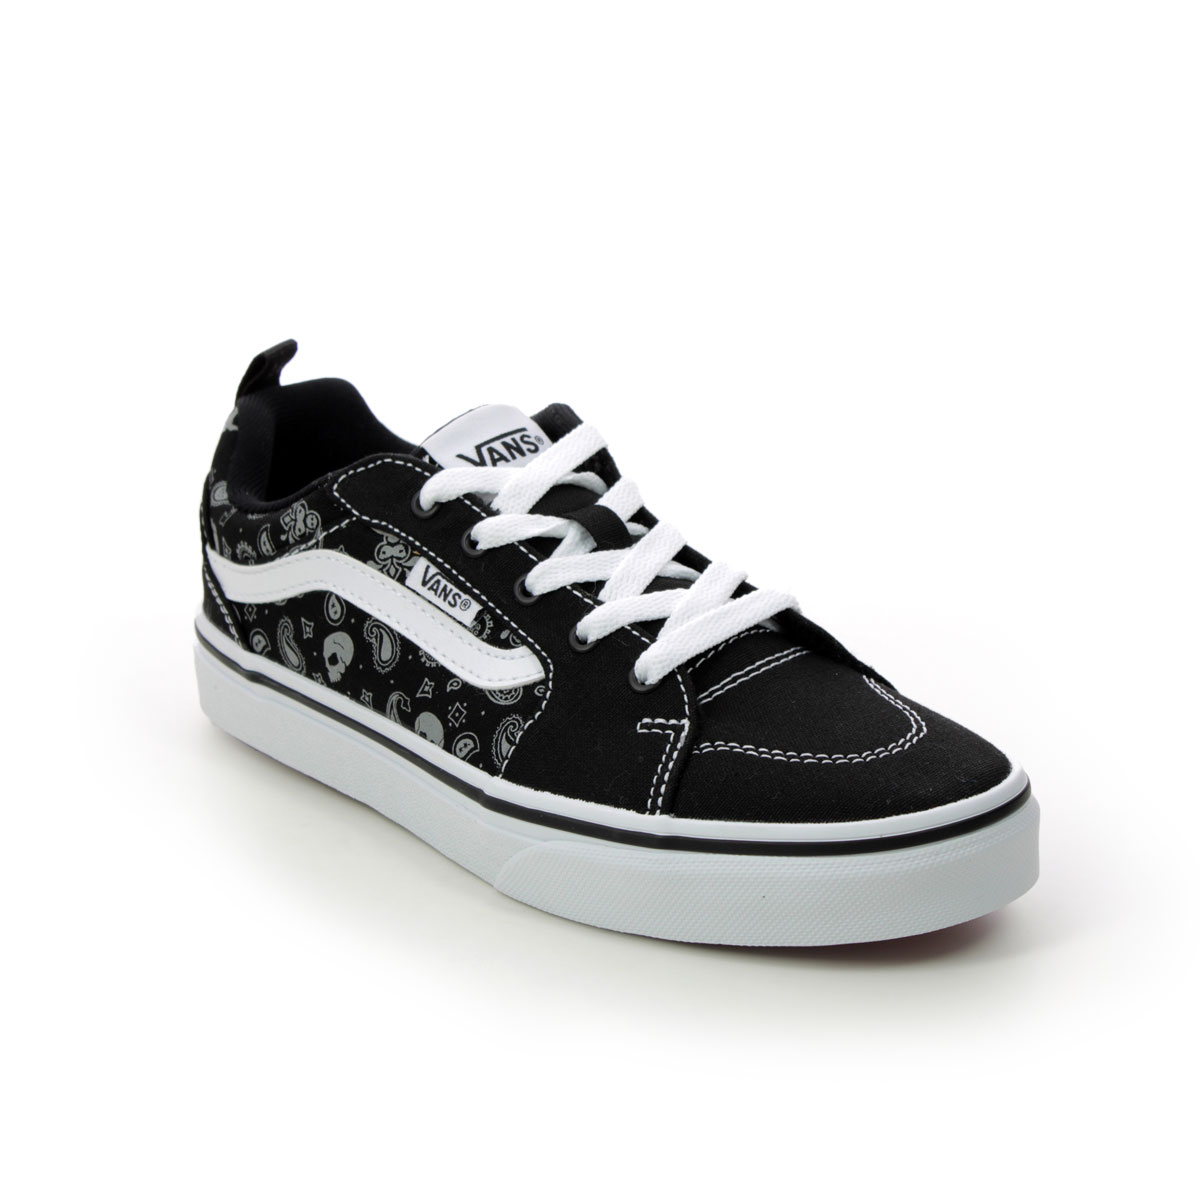 Vans Filmore Youth Black white Kids Boys Trainers VN0A3MVPA-K2 in a Plain Canvas in Size 3